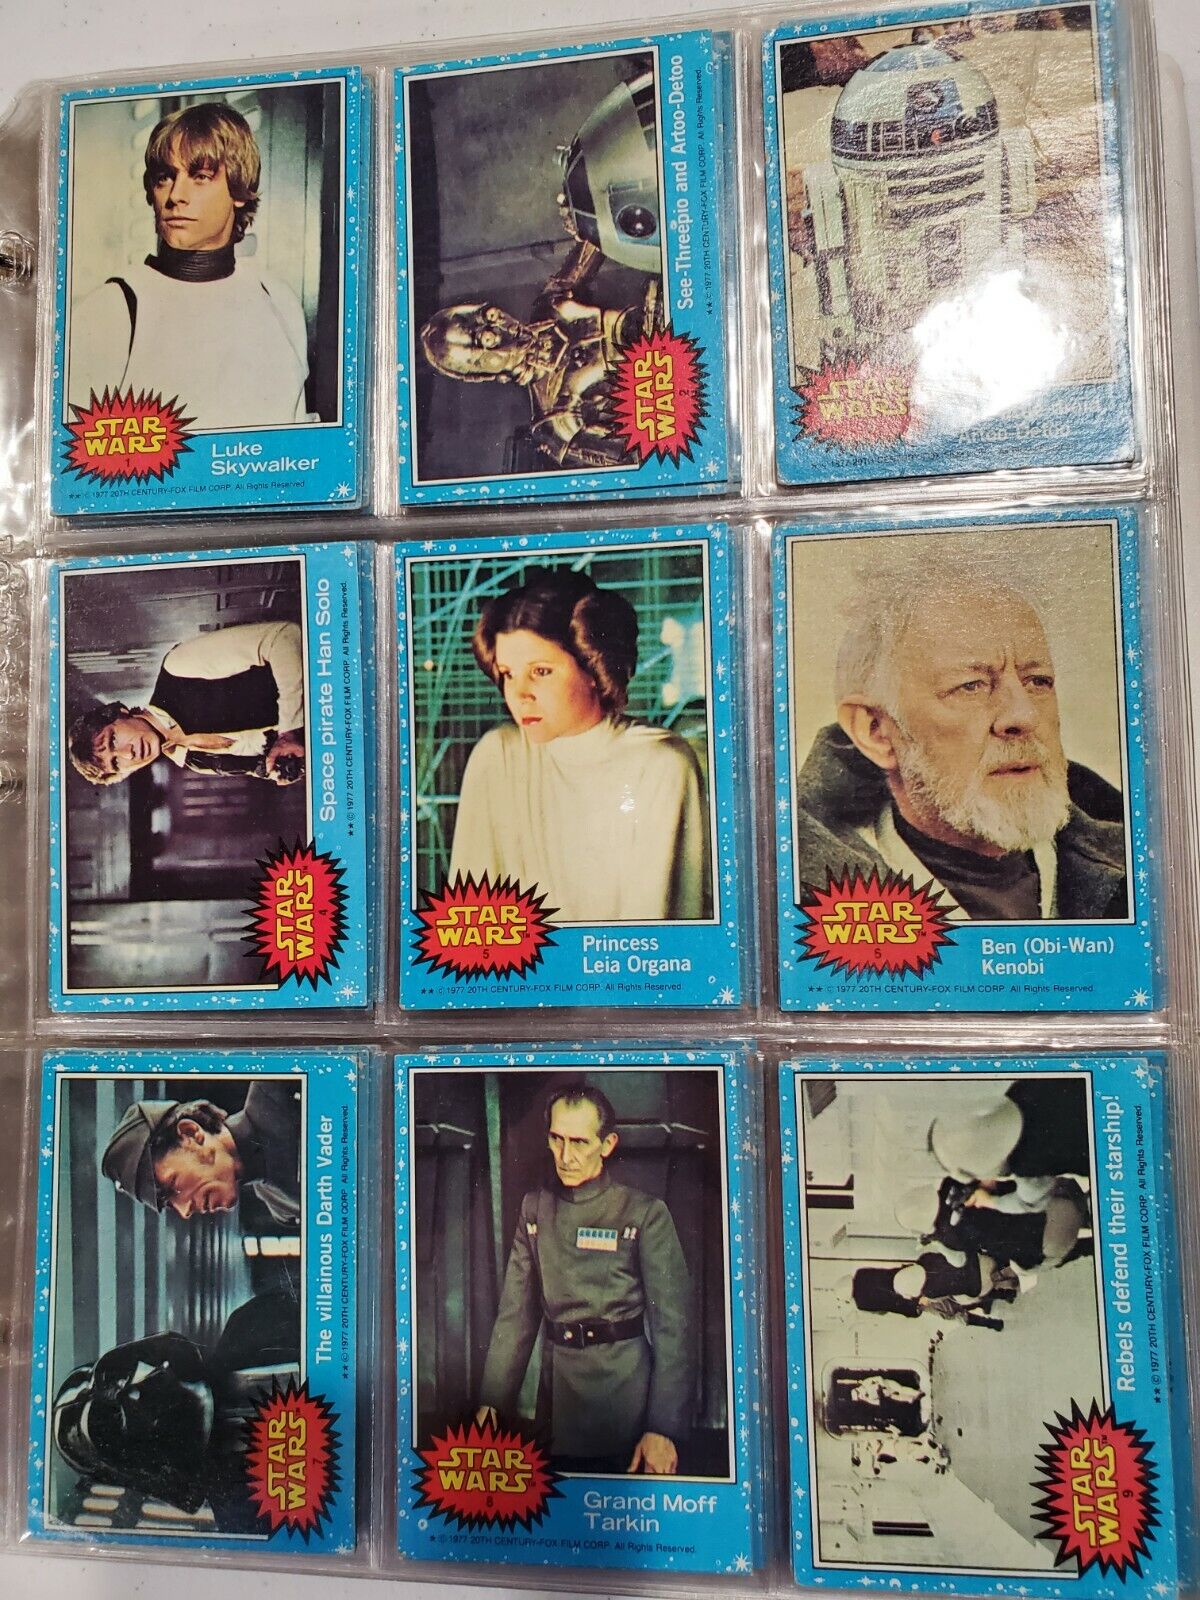 1977 STAR WARS Trading Cards Series 1 - 5 Near Complete Card Set 311 Cards VG 